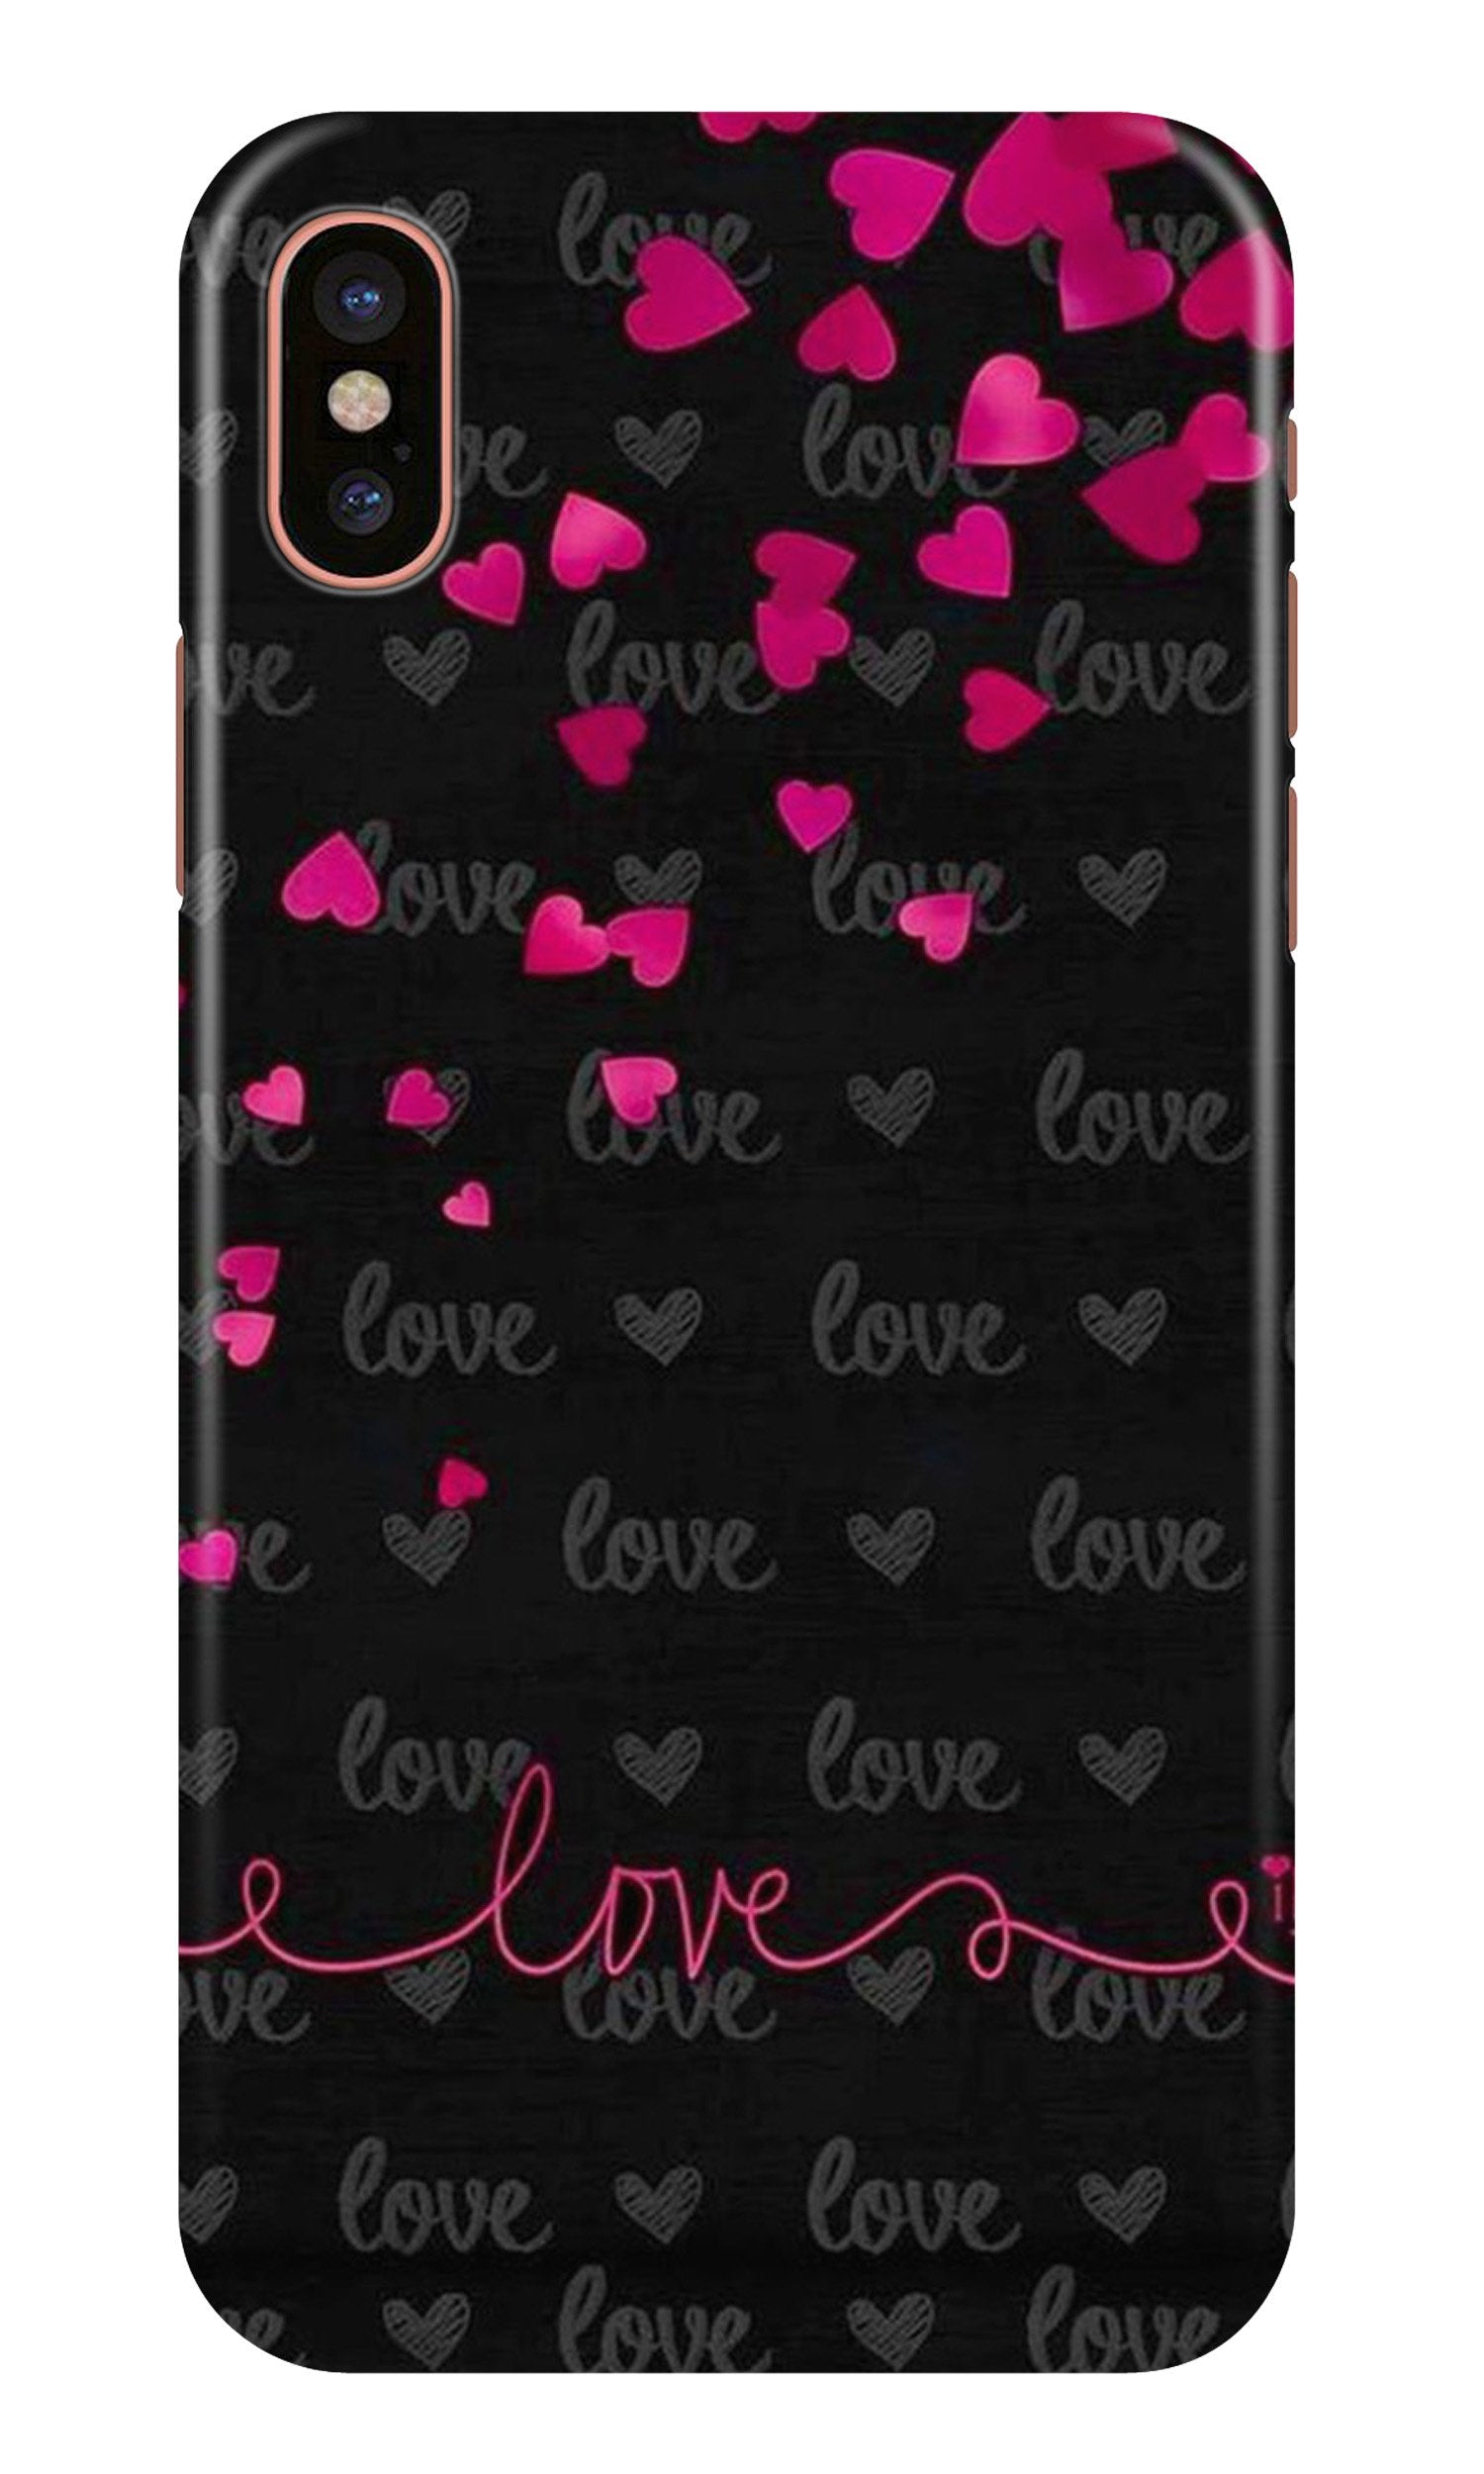 Love in Air Case for iPhone Xr